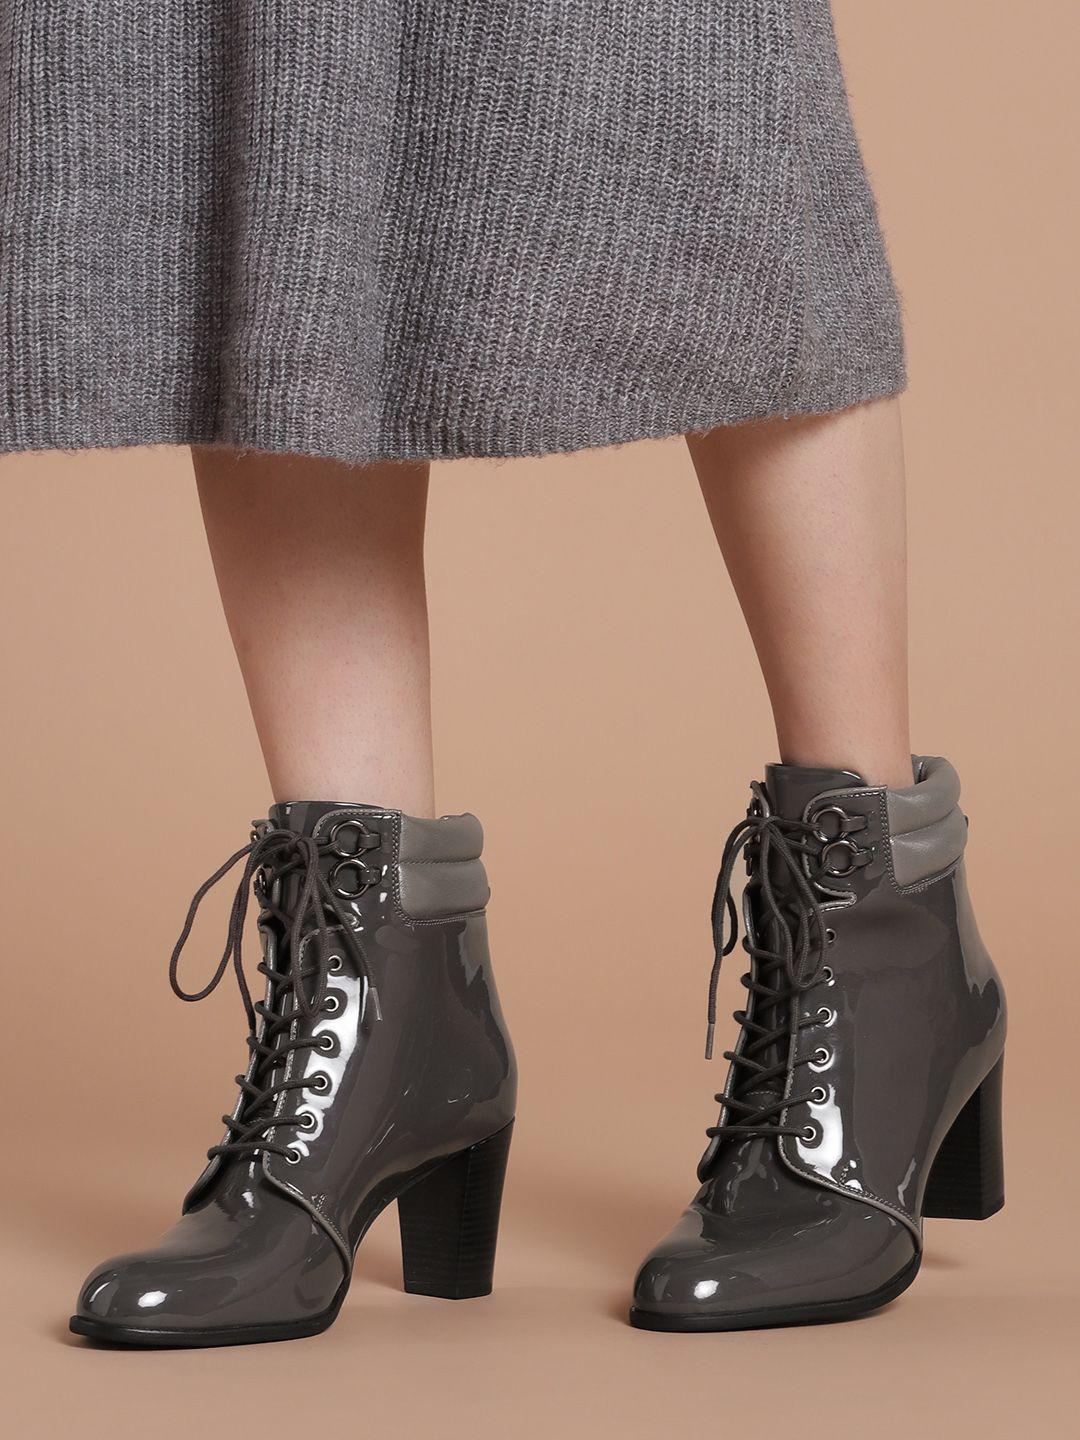 dressberry charcoal grey glossy finish block mid-top heeled boots with quilted detail